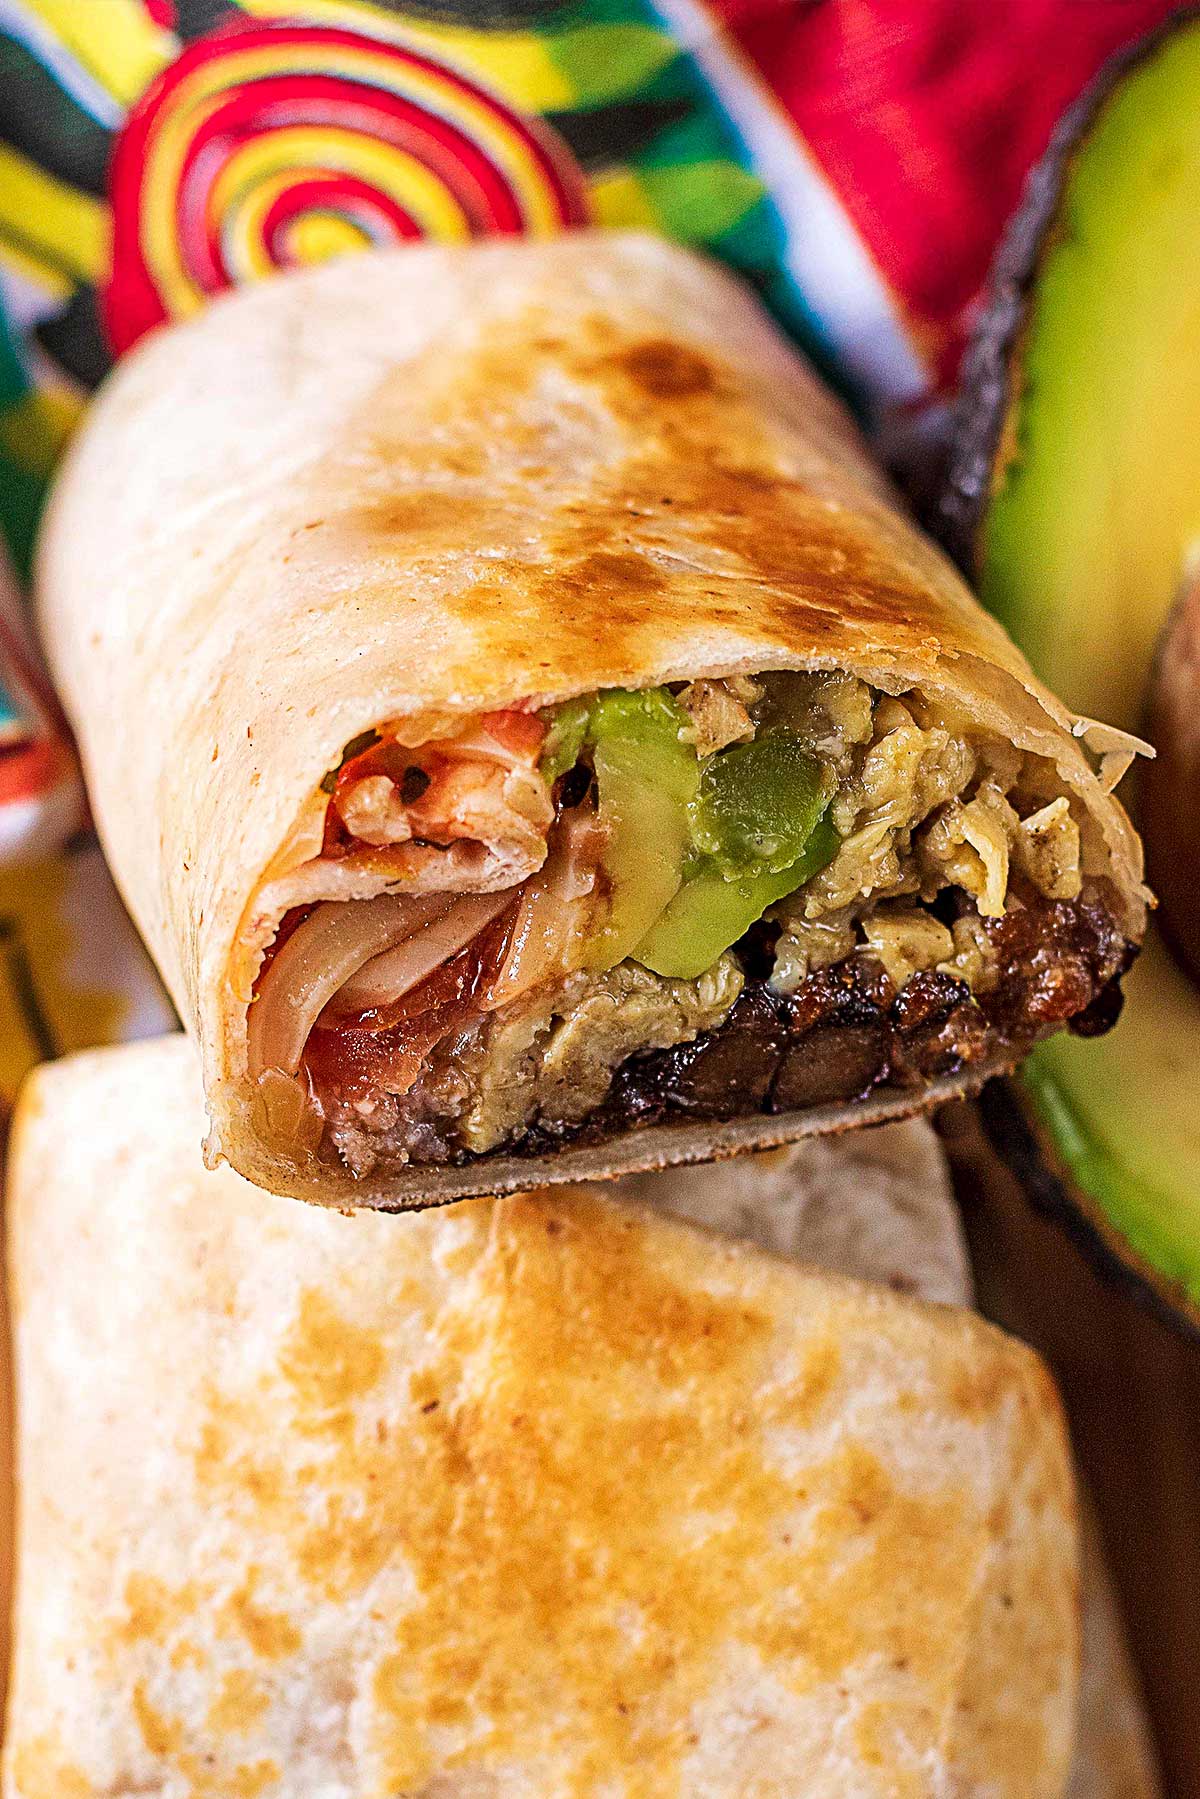 A cut burrito showing all the filling.